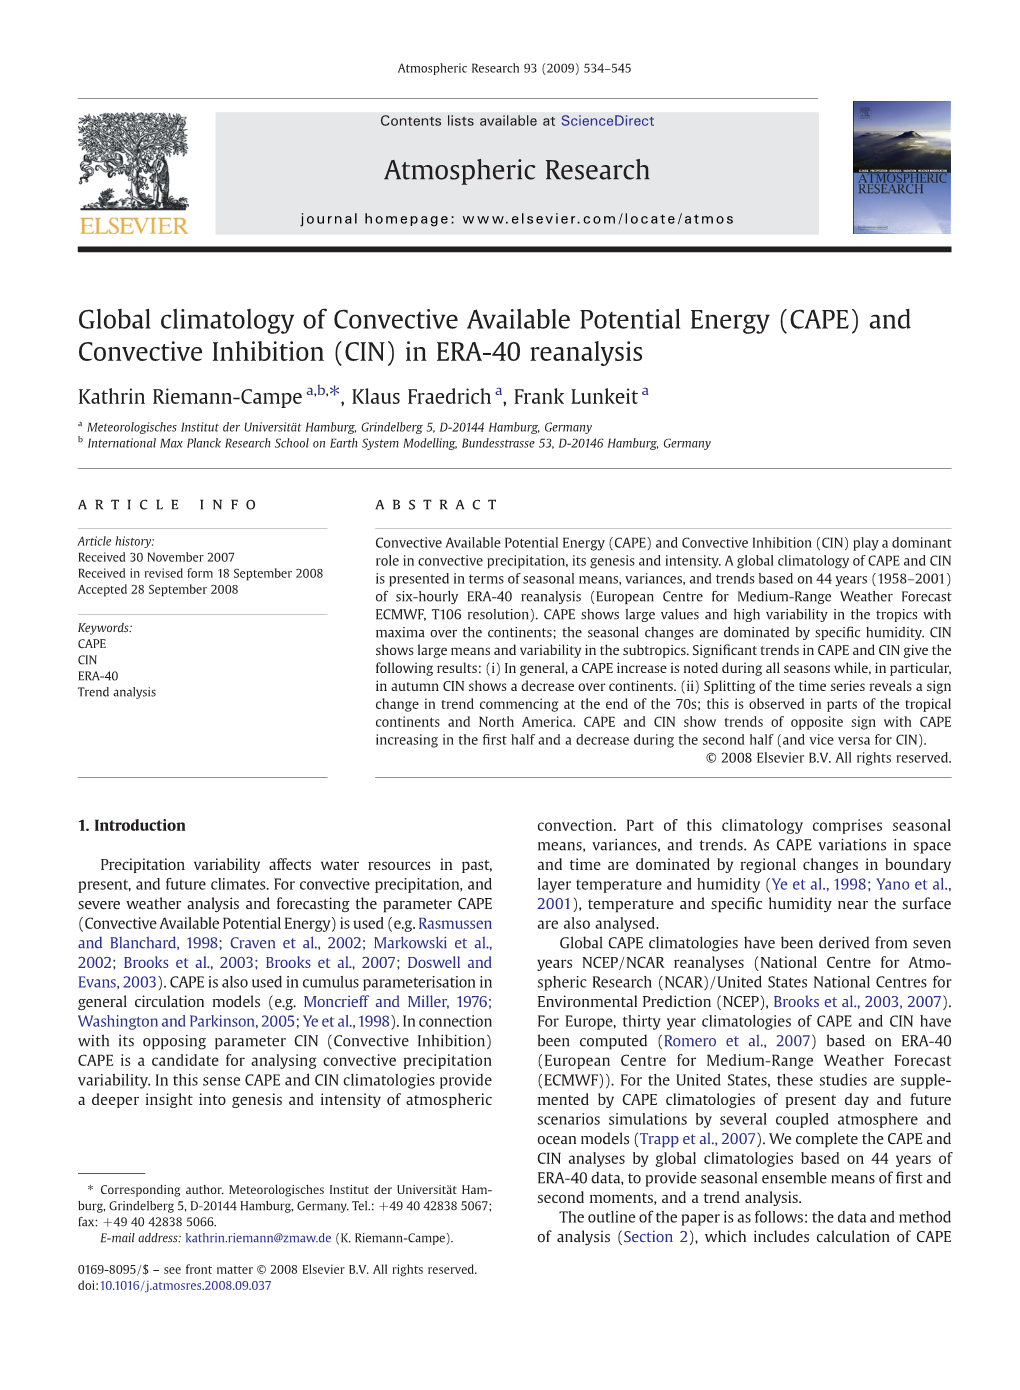 Global Climatology of Convective Available Potential Energy (CAPE) and Convective Inhibition (CIN) in ERA-40 Reanalysis